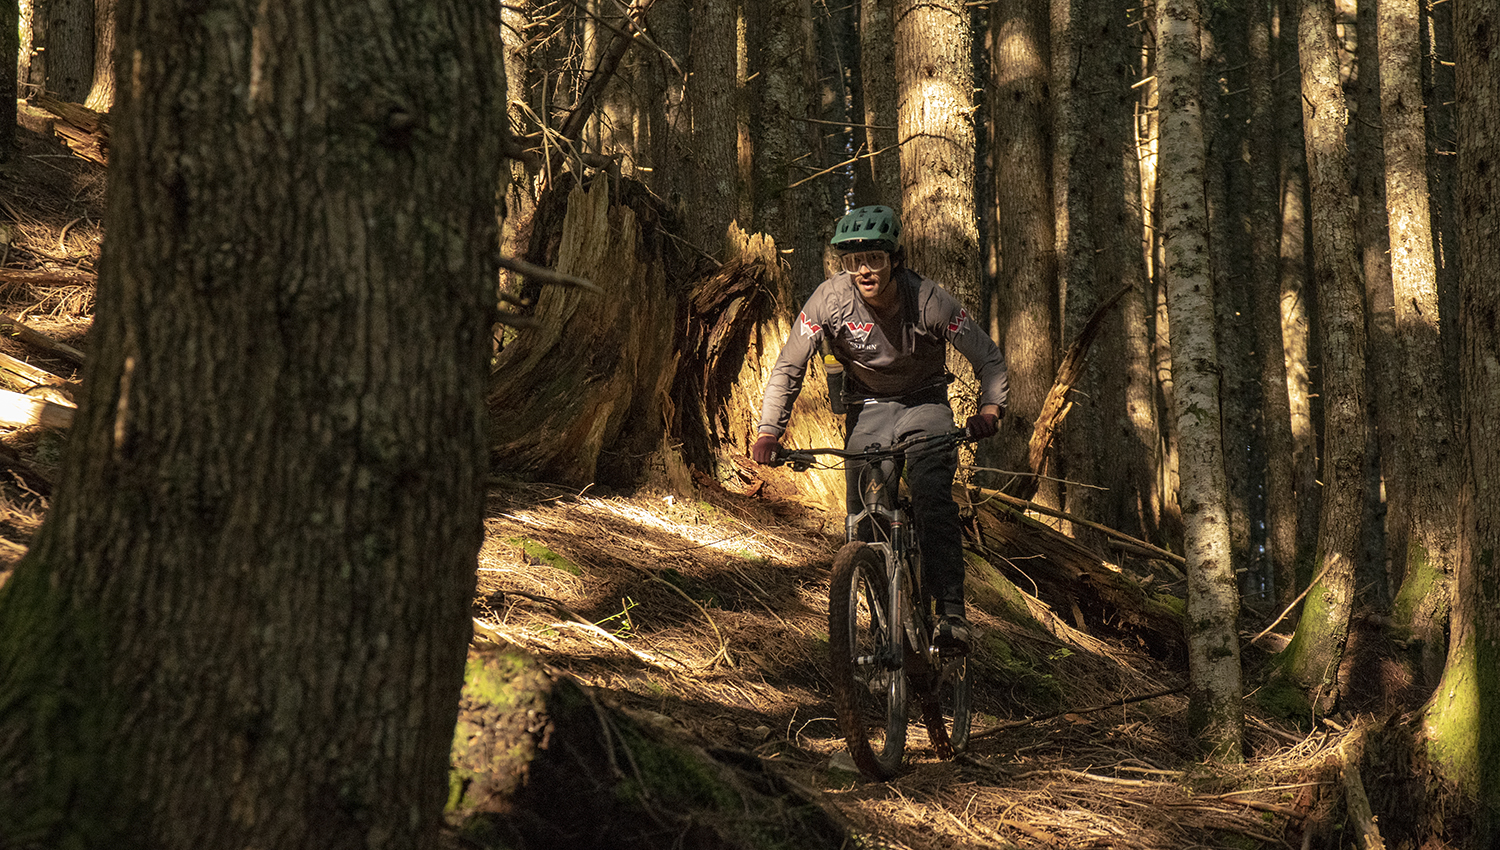 David Golay and Dylan Wood Review the Norco Range for Blister